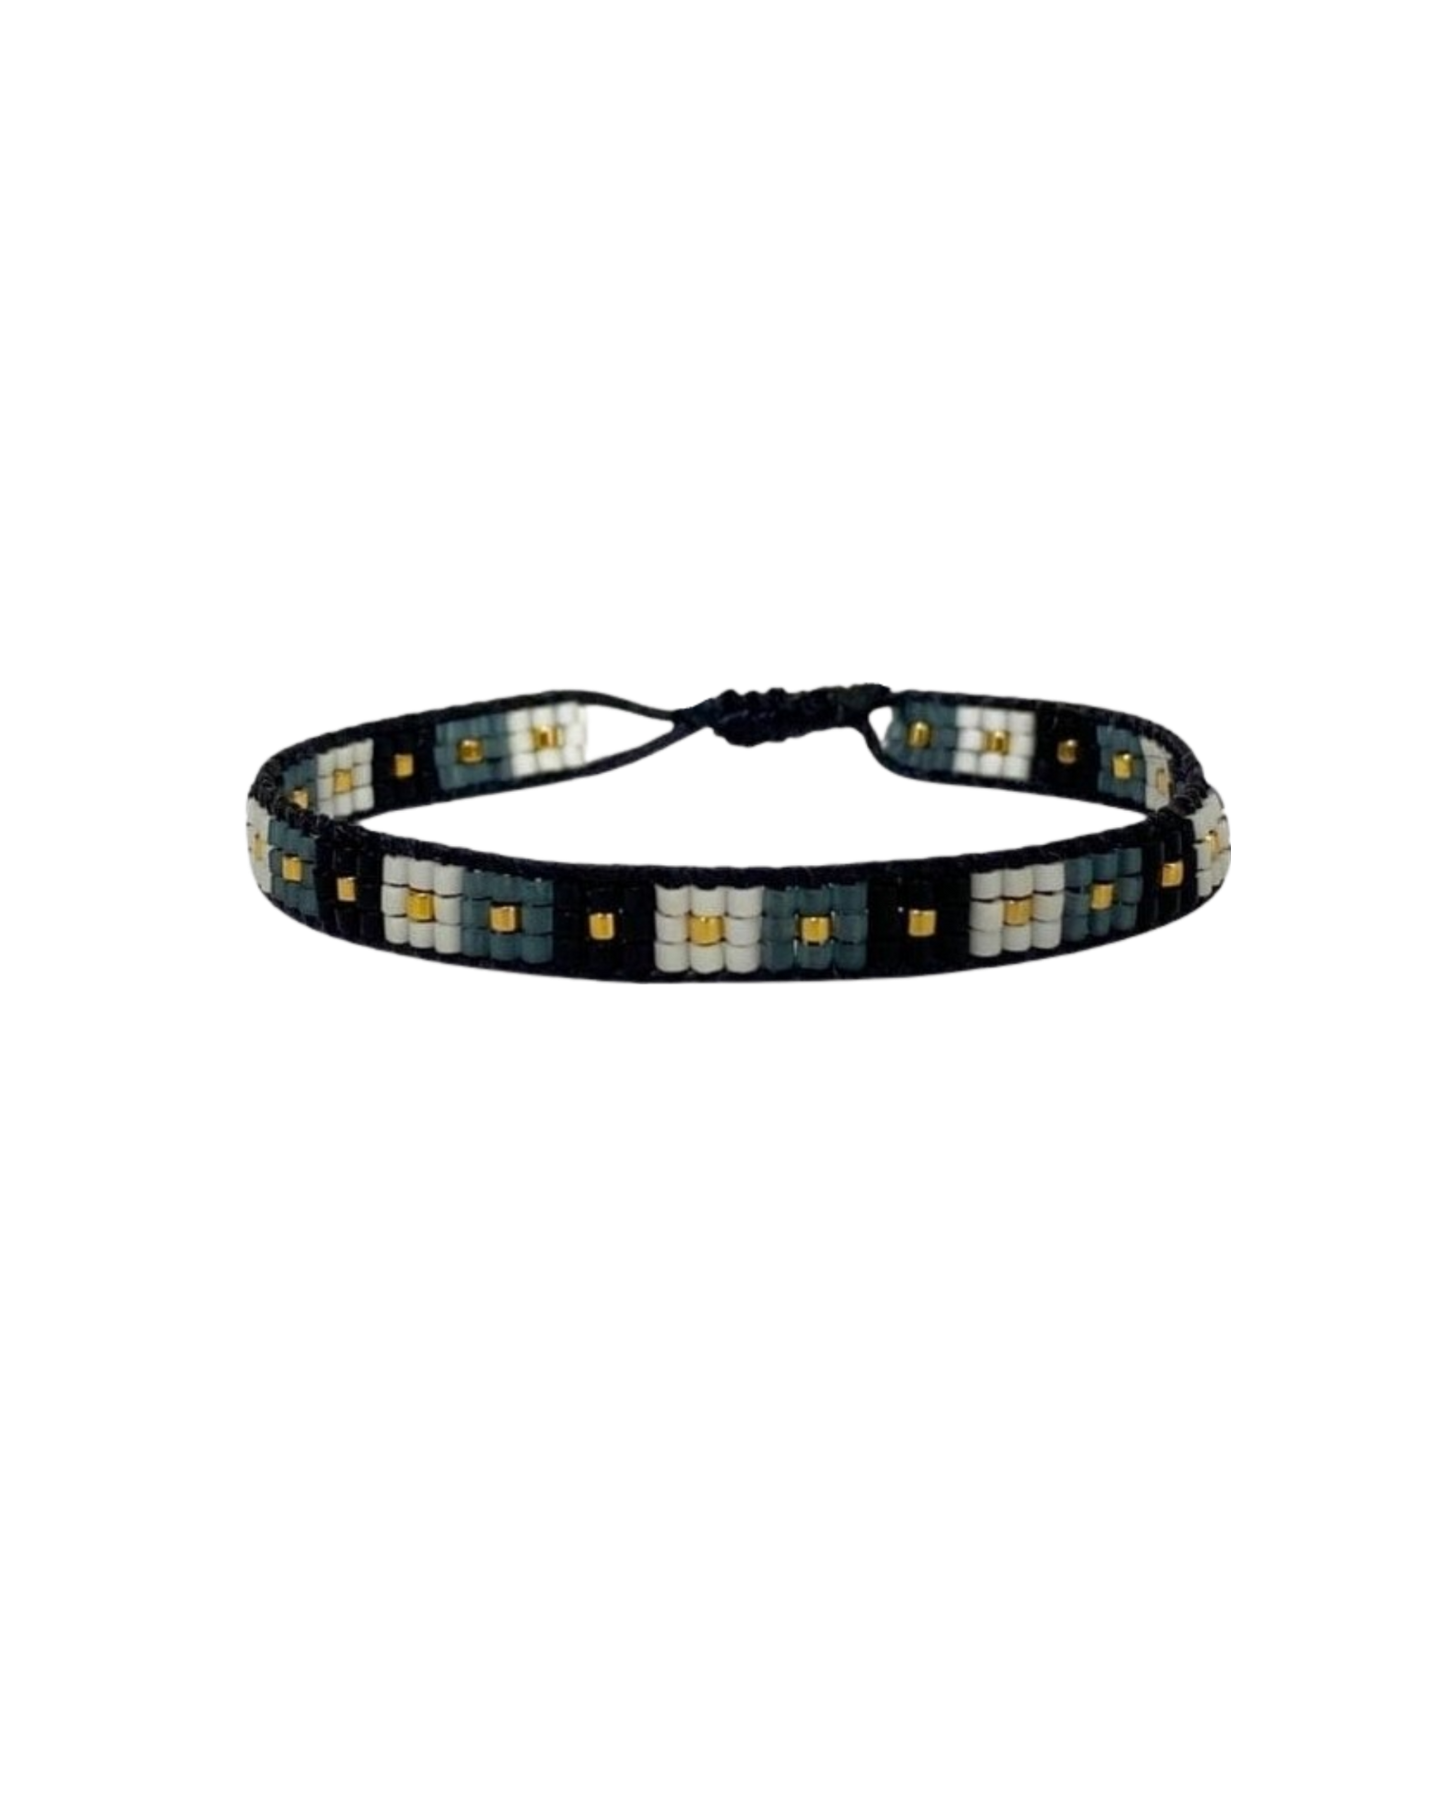 beaded-bracelet with checkered design in black grey colors